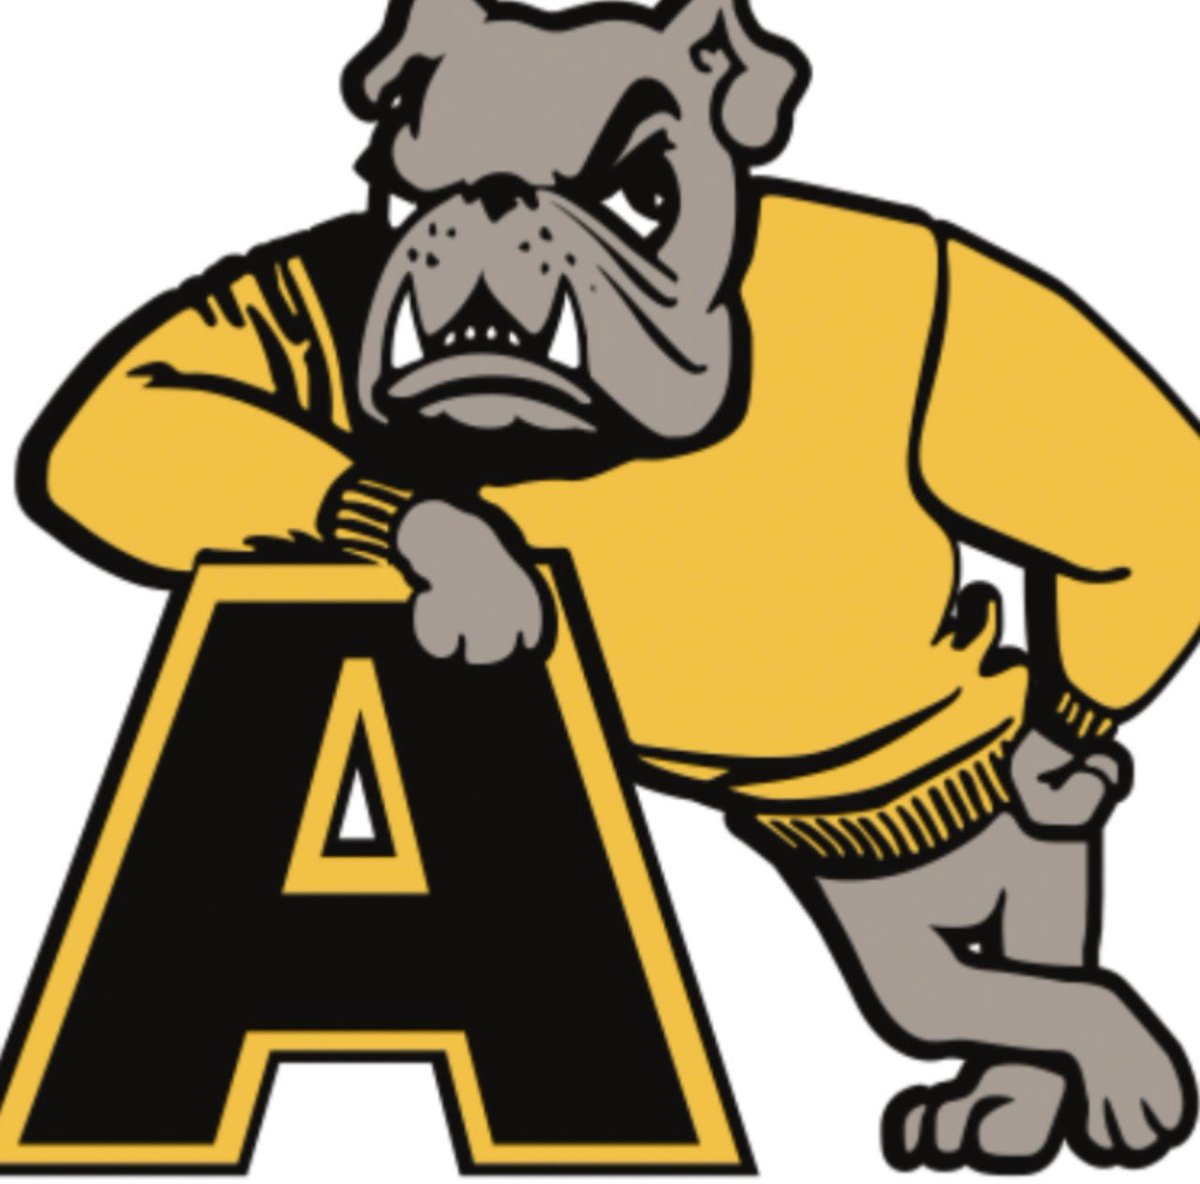 I’ll be signing to Adrian College on February 13th, 3:15 PM at Carrollton High School! #GoDawgs @AdrianCollegeFB @AdrianCollege @CarrolltonFB